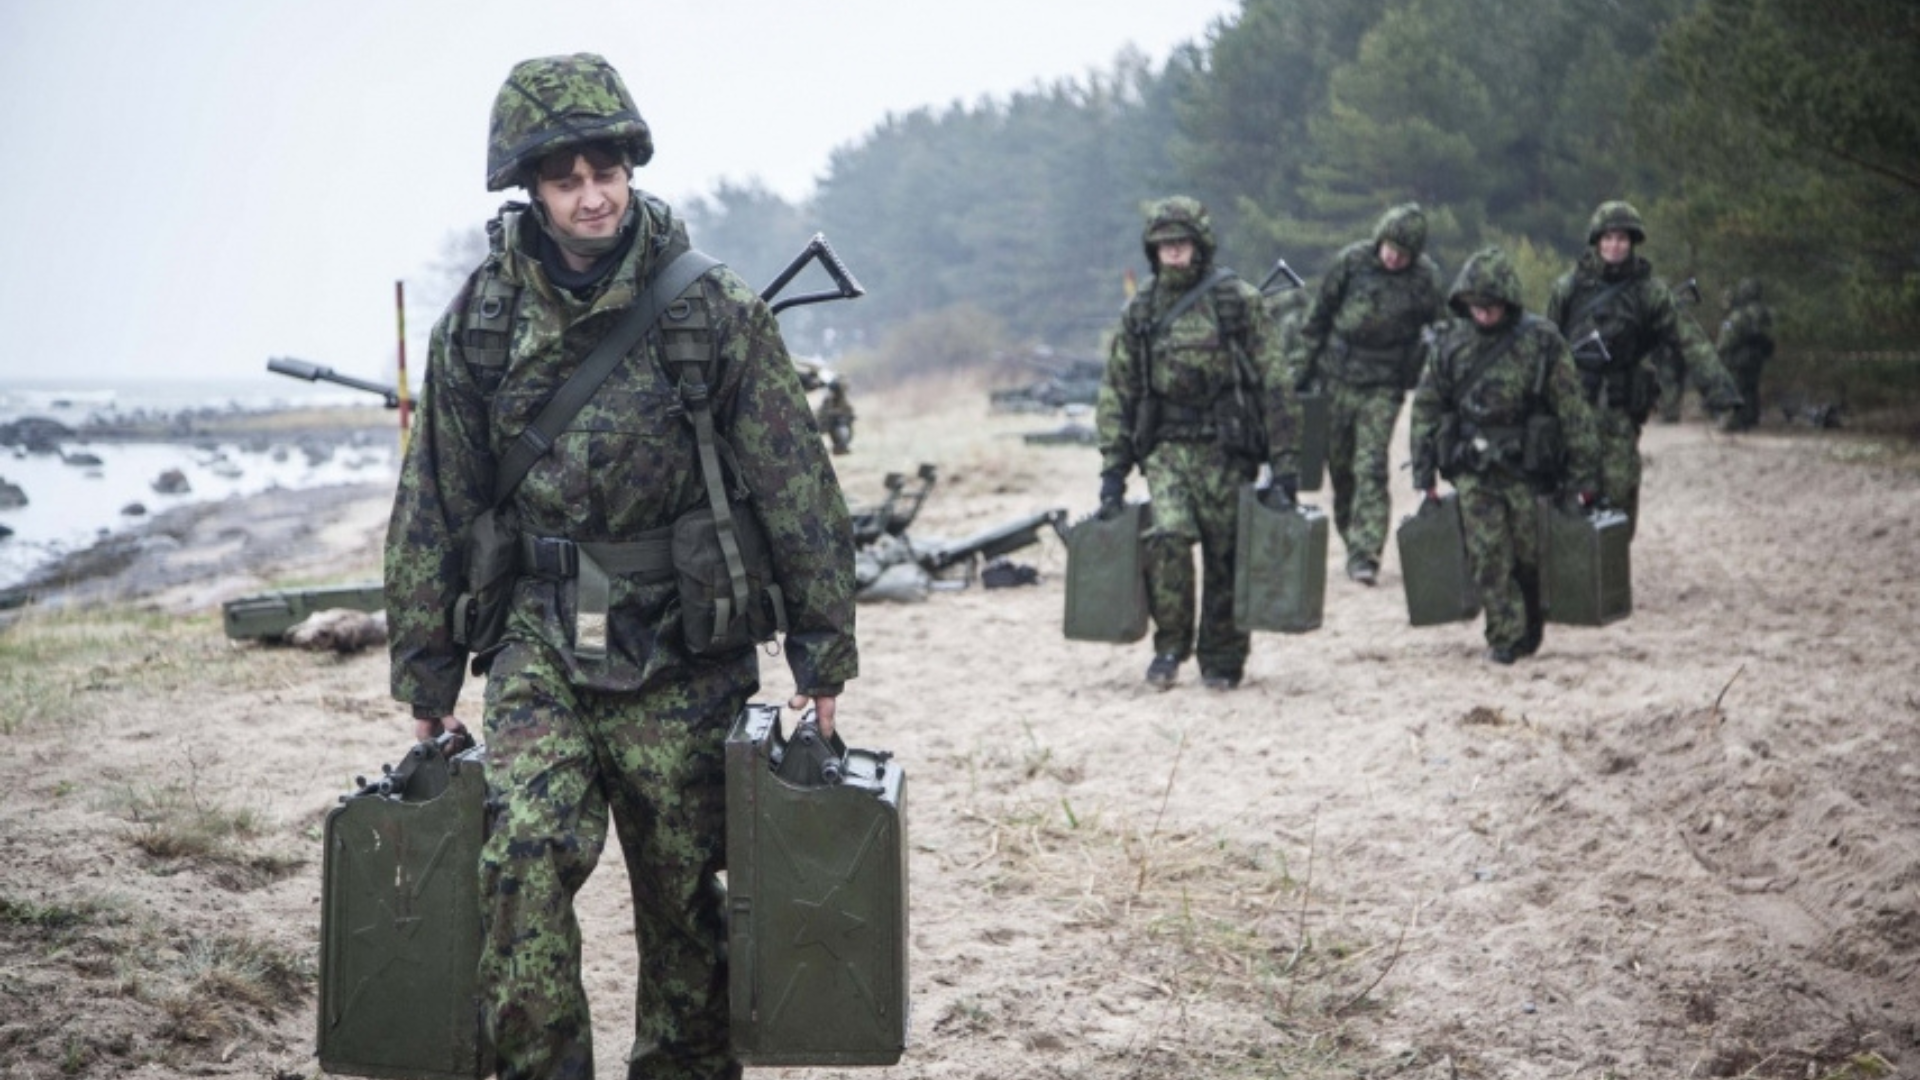 Estonia on Alert: Front-Line State Braces For Potential Russian Aggression